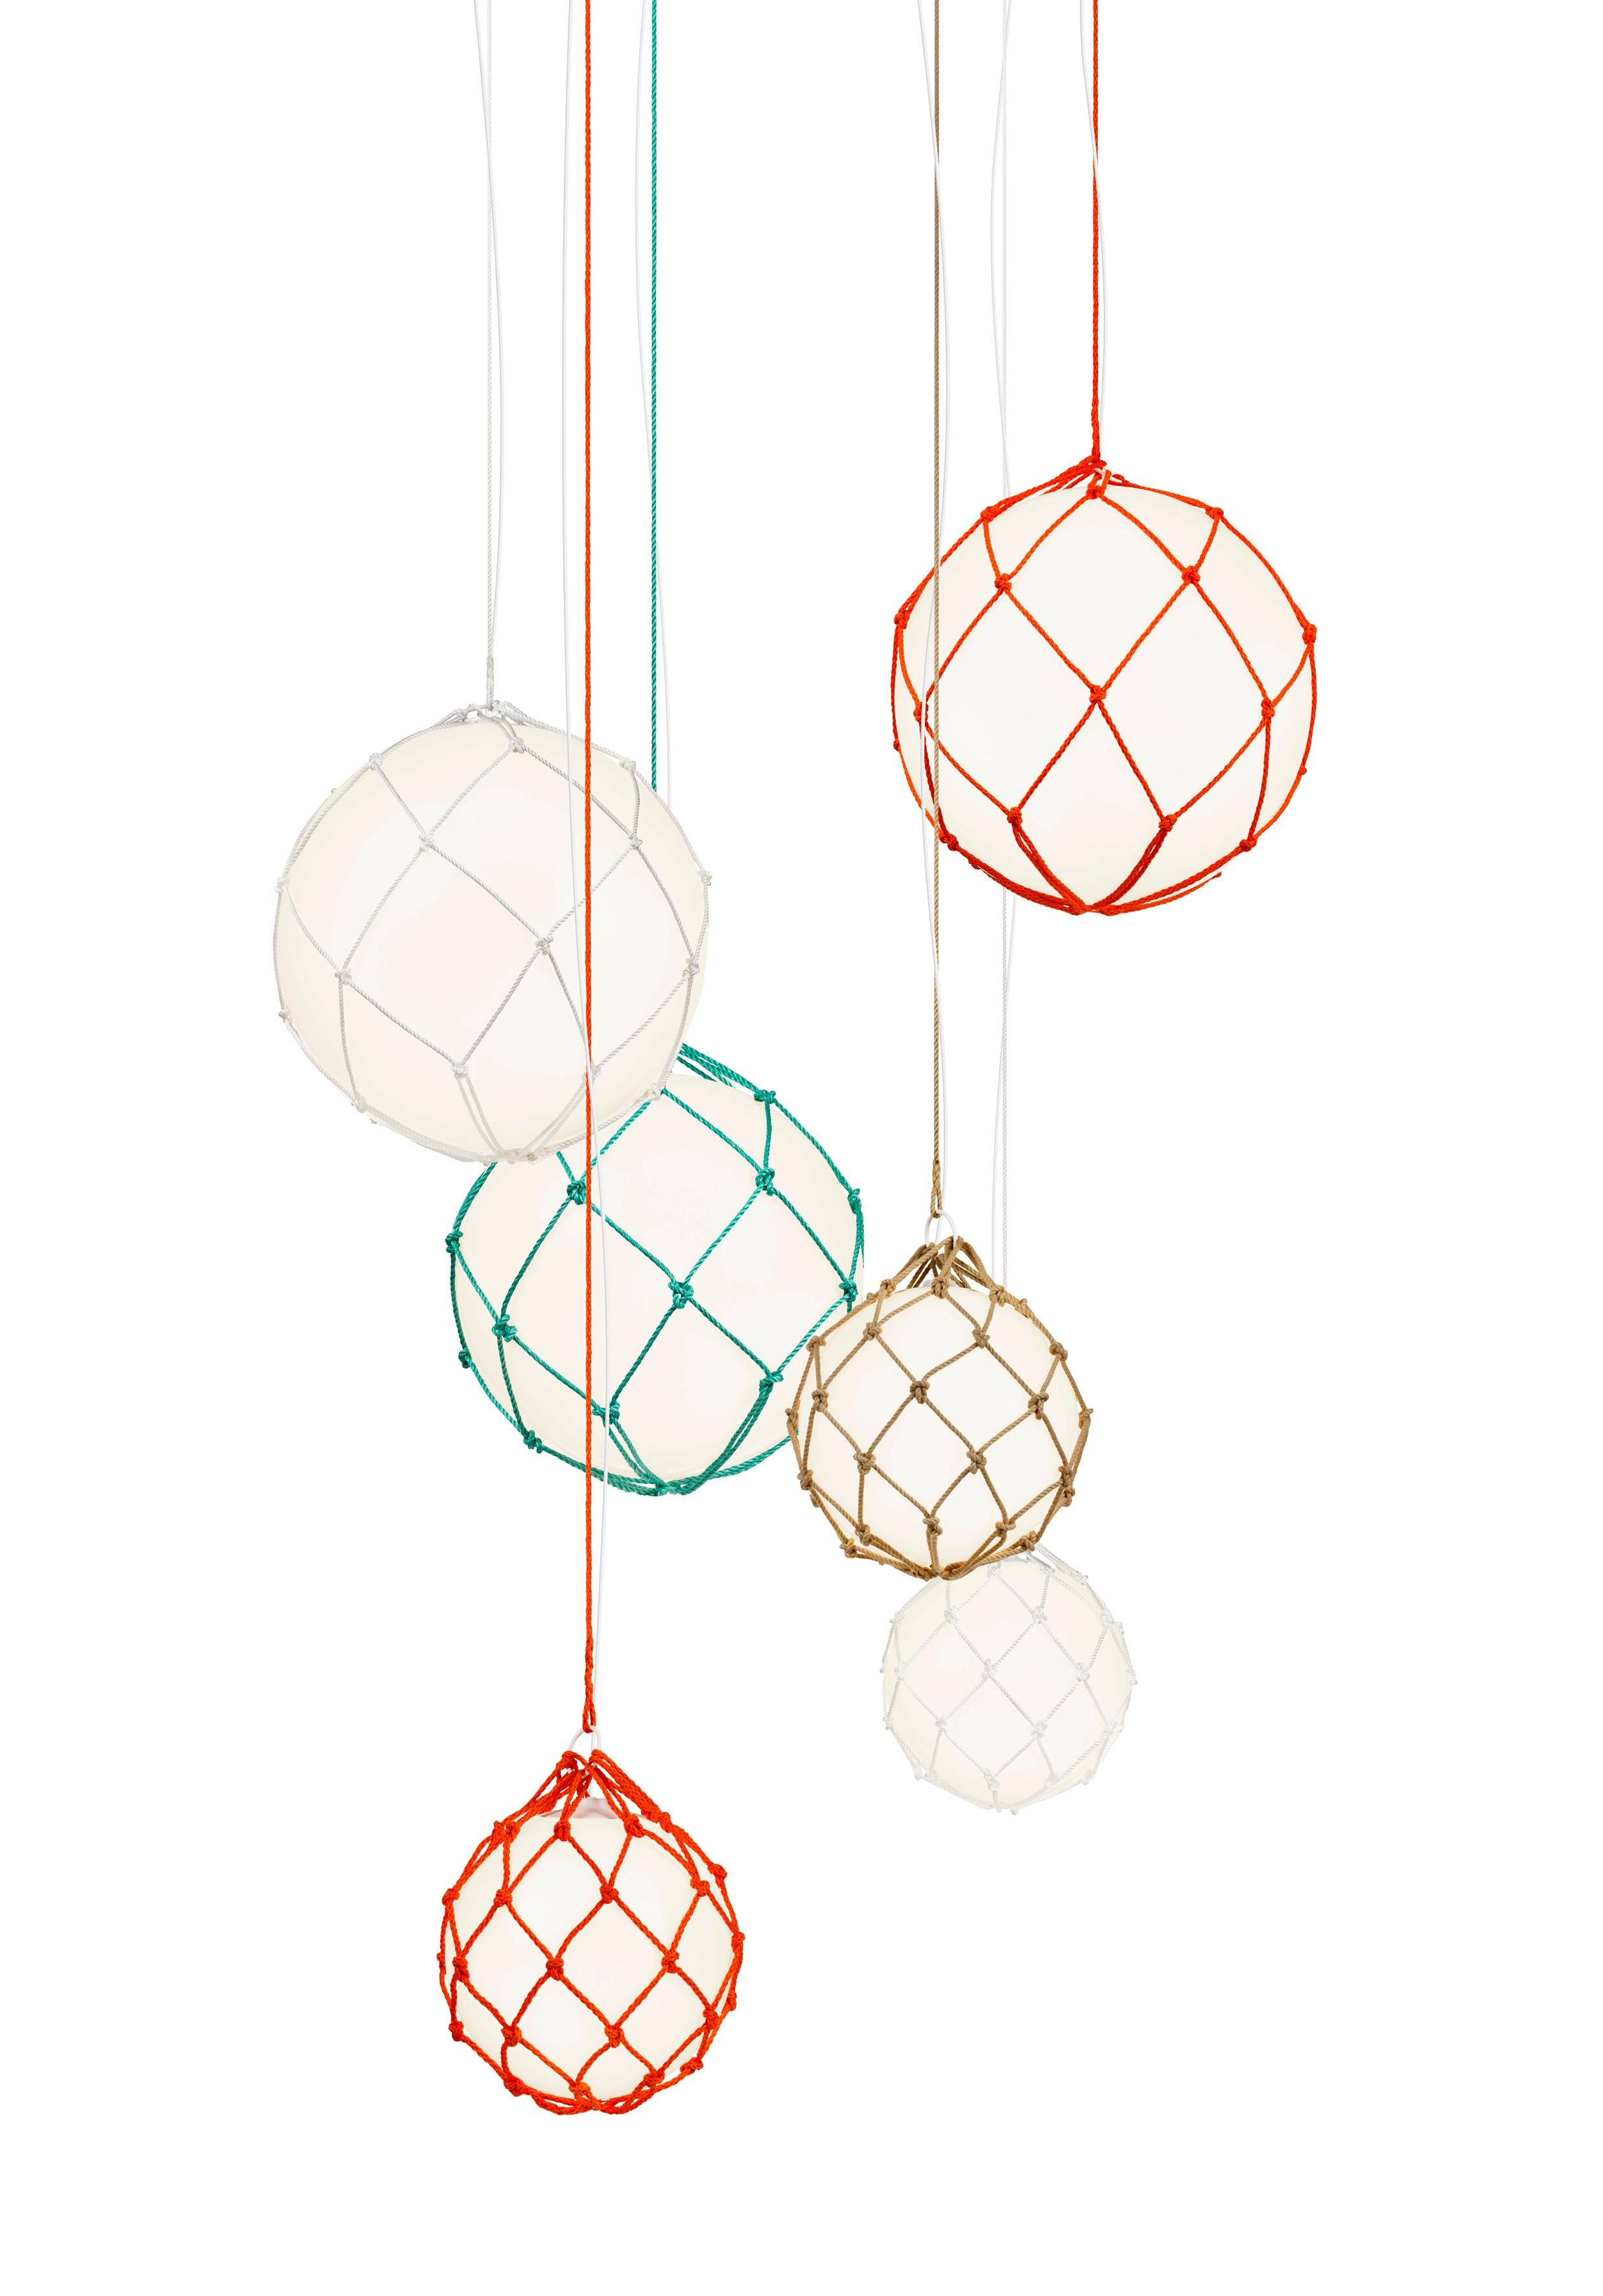 The handmade fisherman-cord nets that hold the round UV-stabile polythene globes bring with the Fisherman pendant, designed by Mattias Ståhlbom, the feel of beachside living. 

Environment: Indoor
Shade: Polythene
Cord: White
Cord length: 8